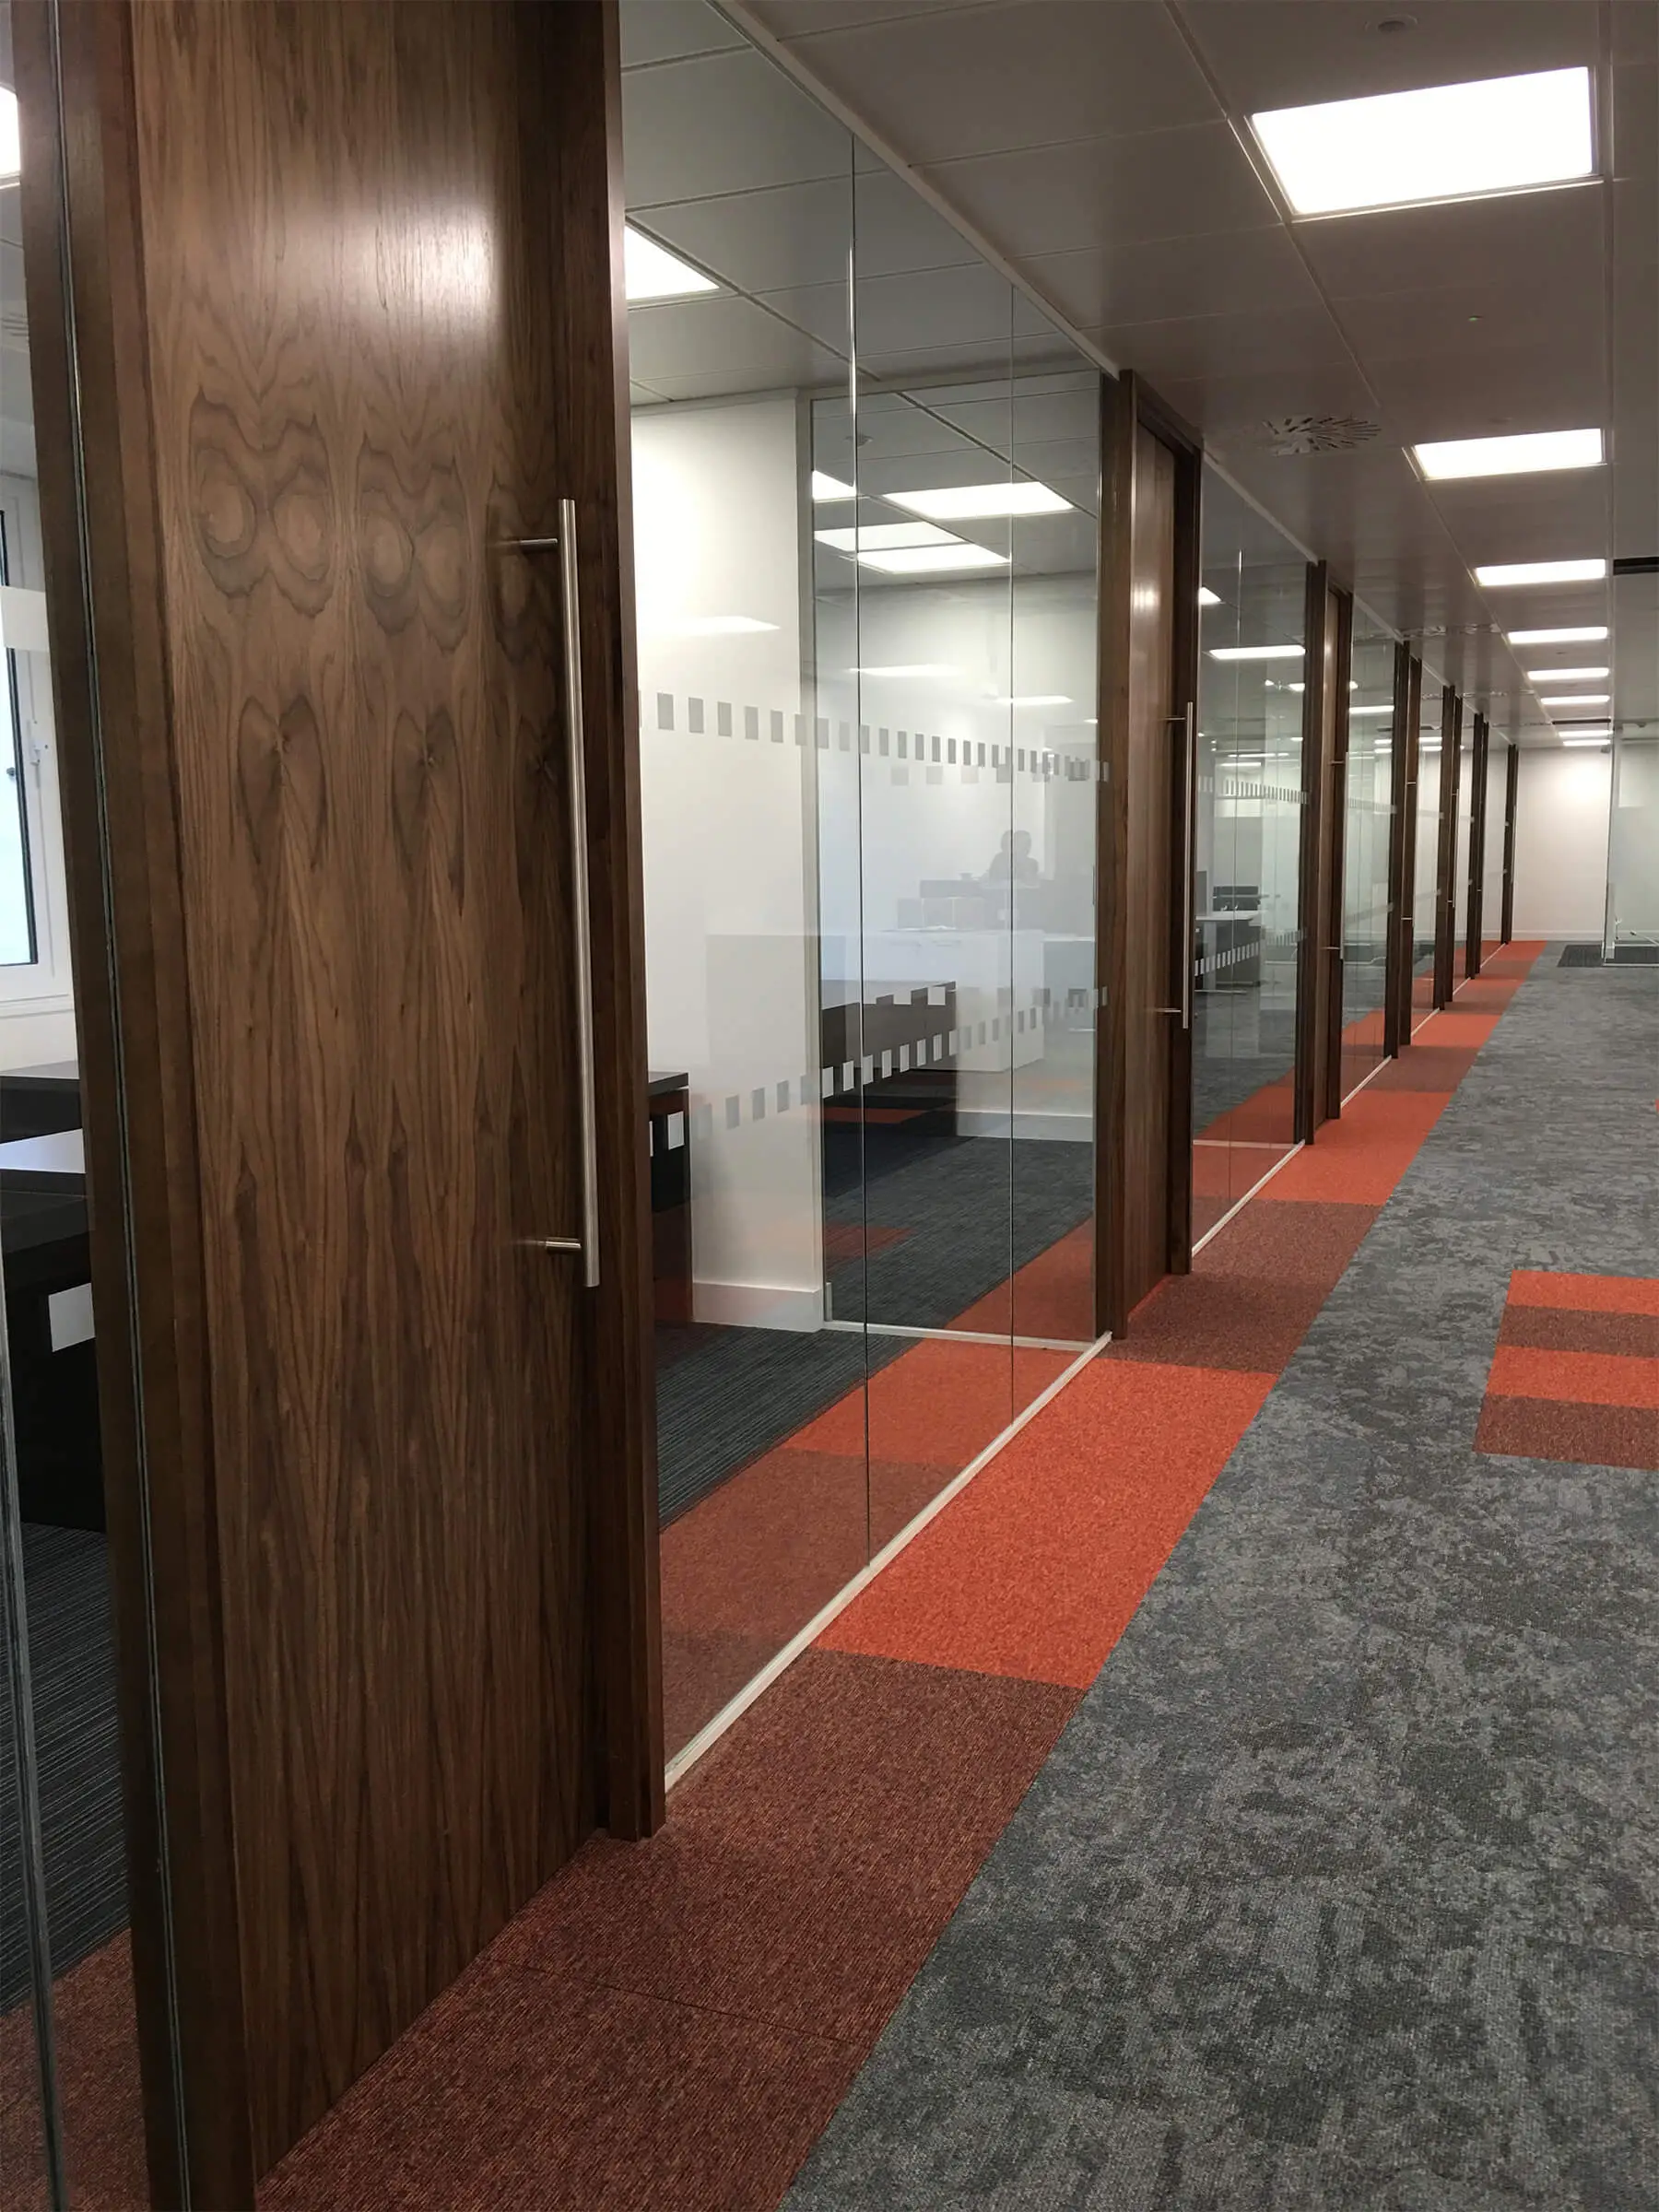 Designer floor office with single glaze partitions with solid doors